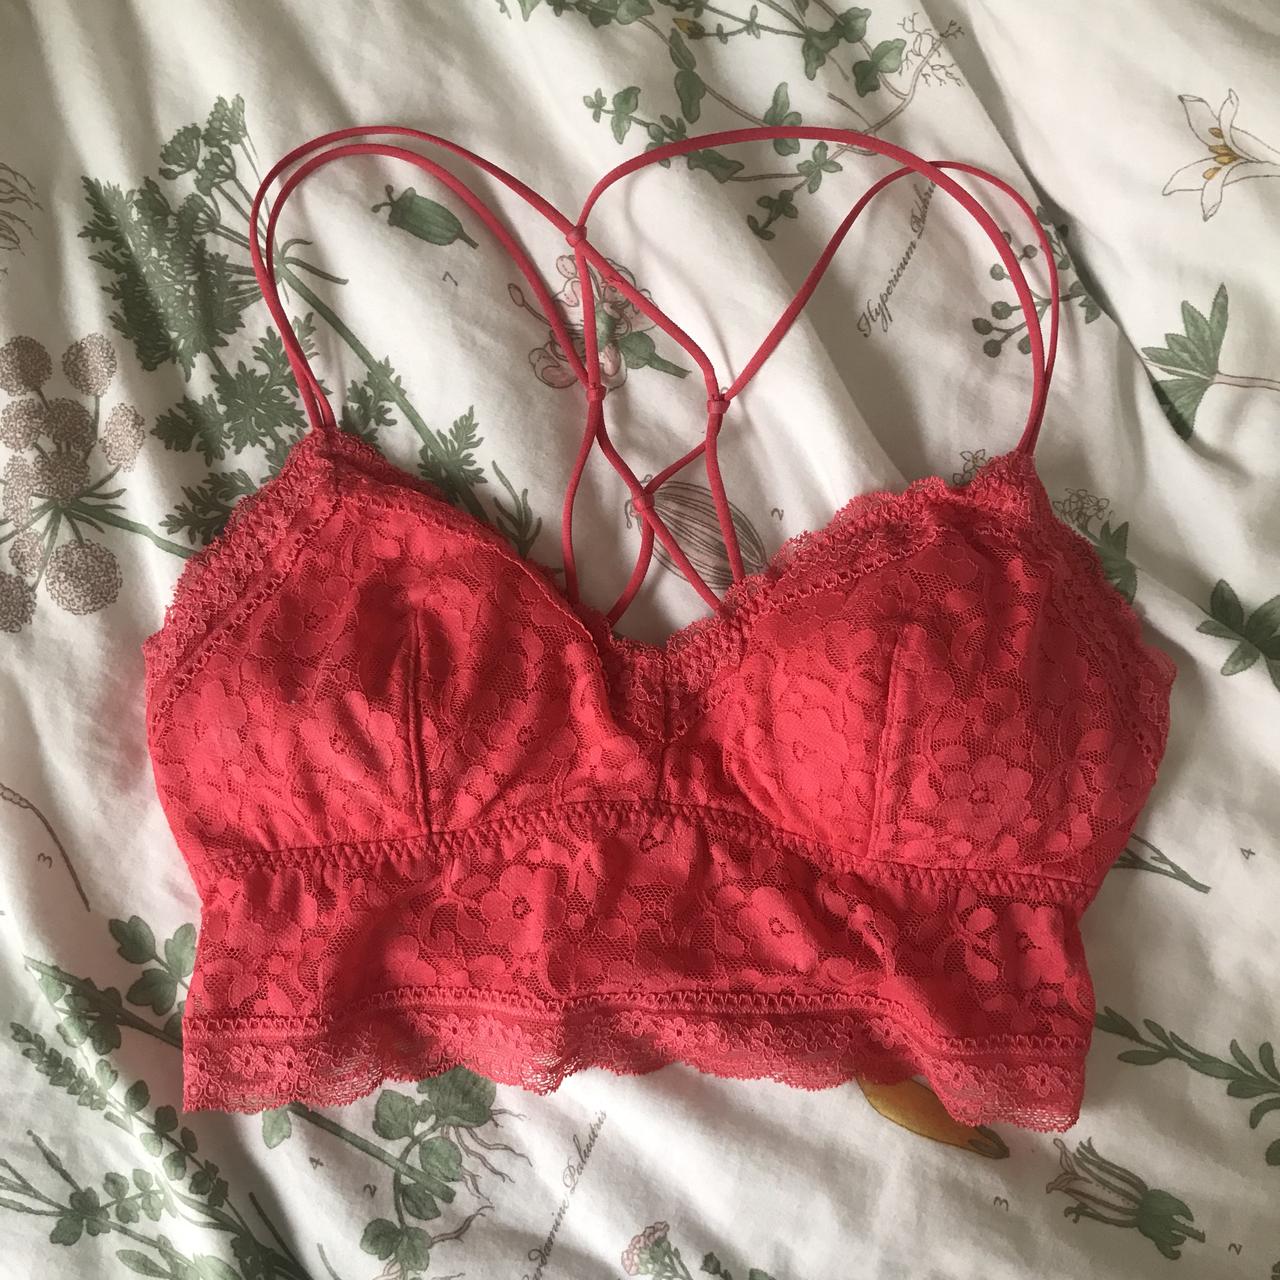 HOLLISTER/GILLY HICKS PADDED LACE BRALETTE — HOT